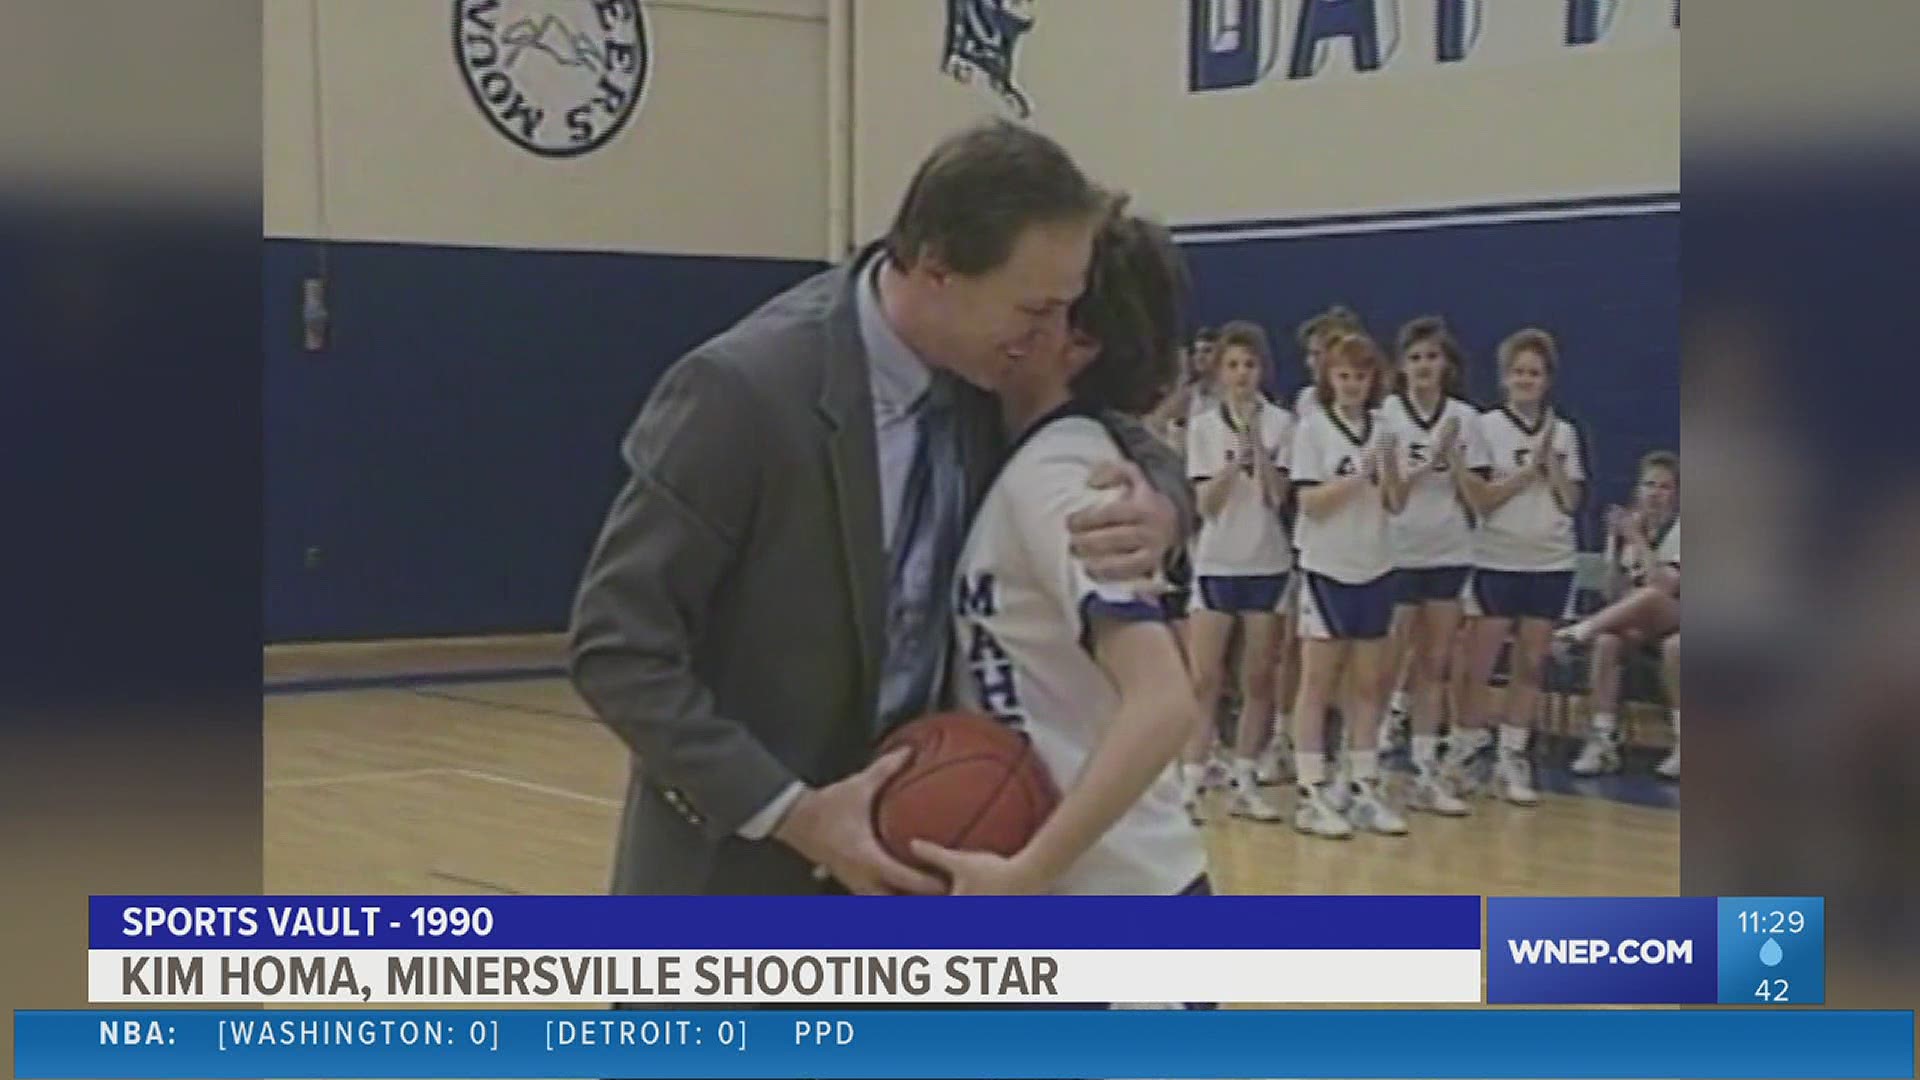 Sports Vault: 1990, Kim Homa, Minersville HS girls basketball star. Homa finished her career as the State's second leading scorer on the all-time list.